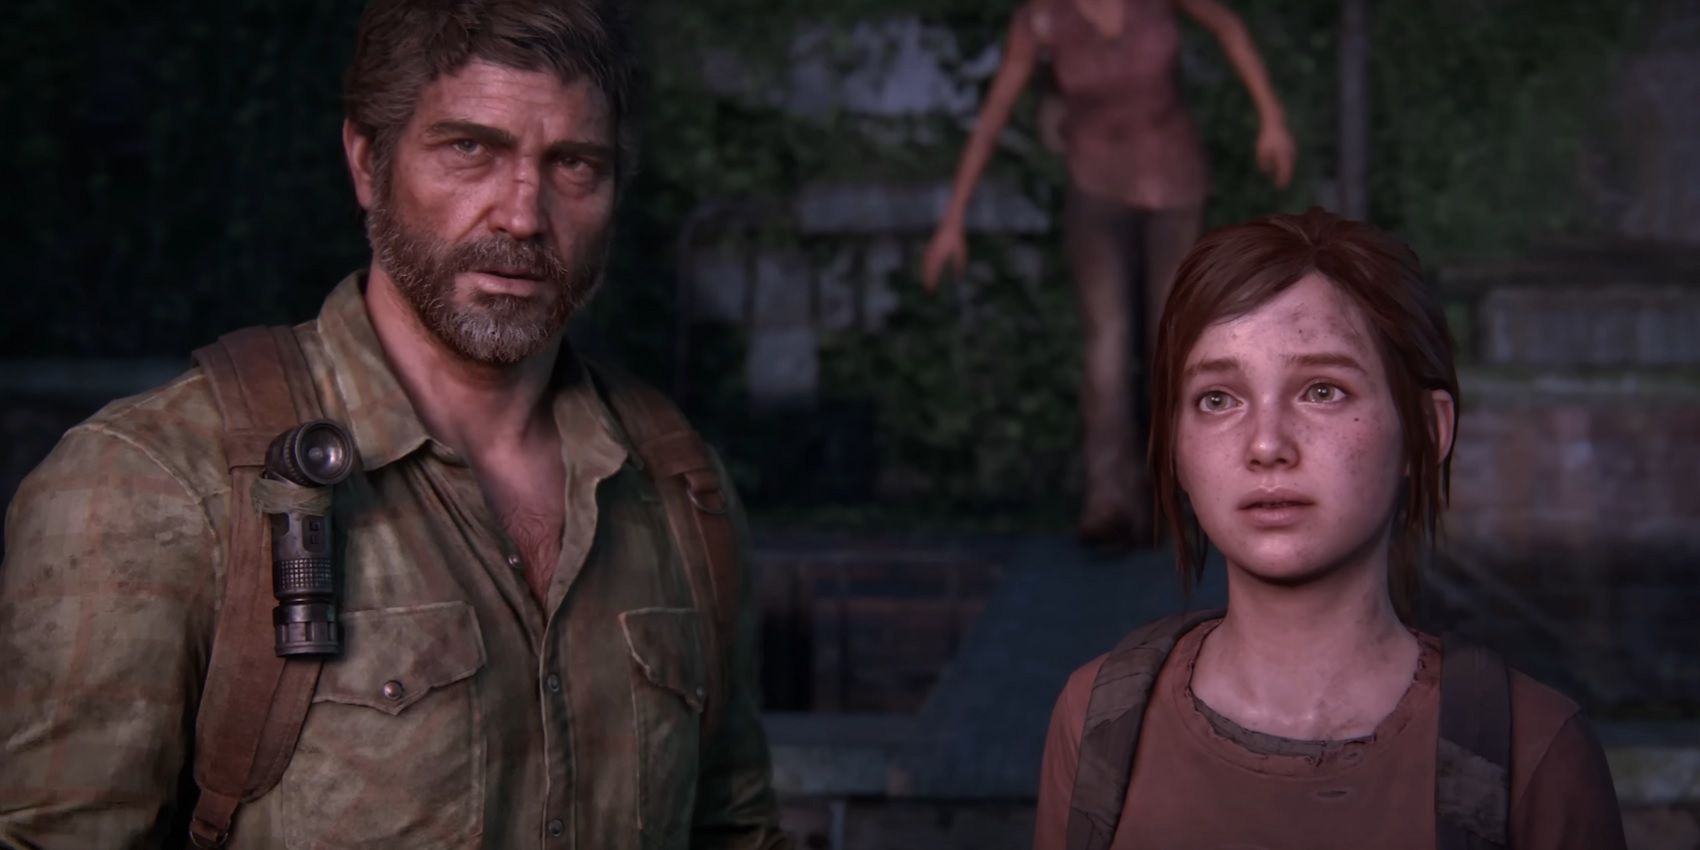 TLOU Joel And Ellie See The Sun